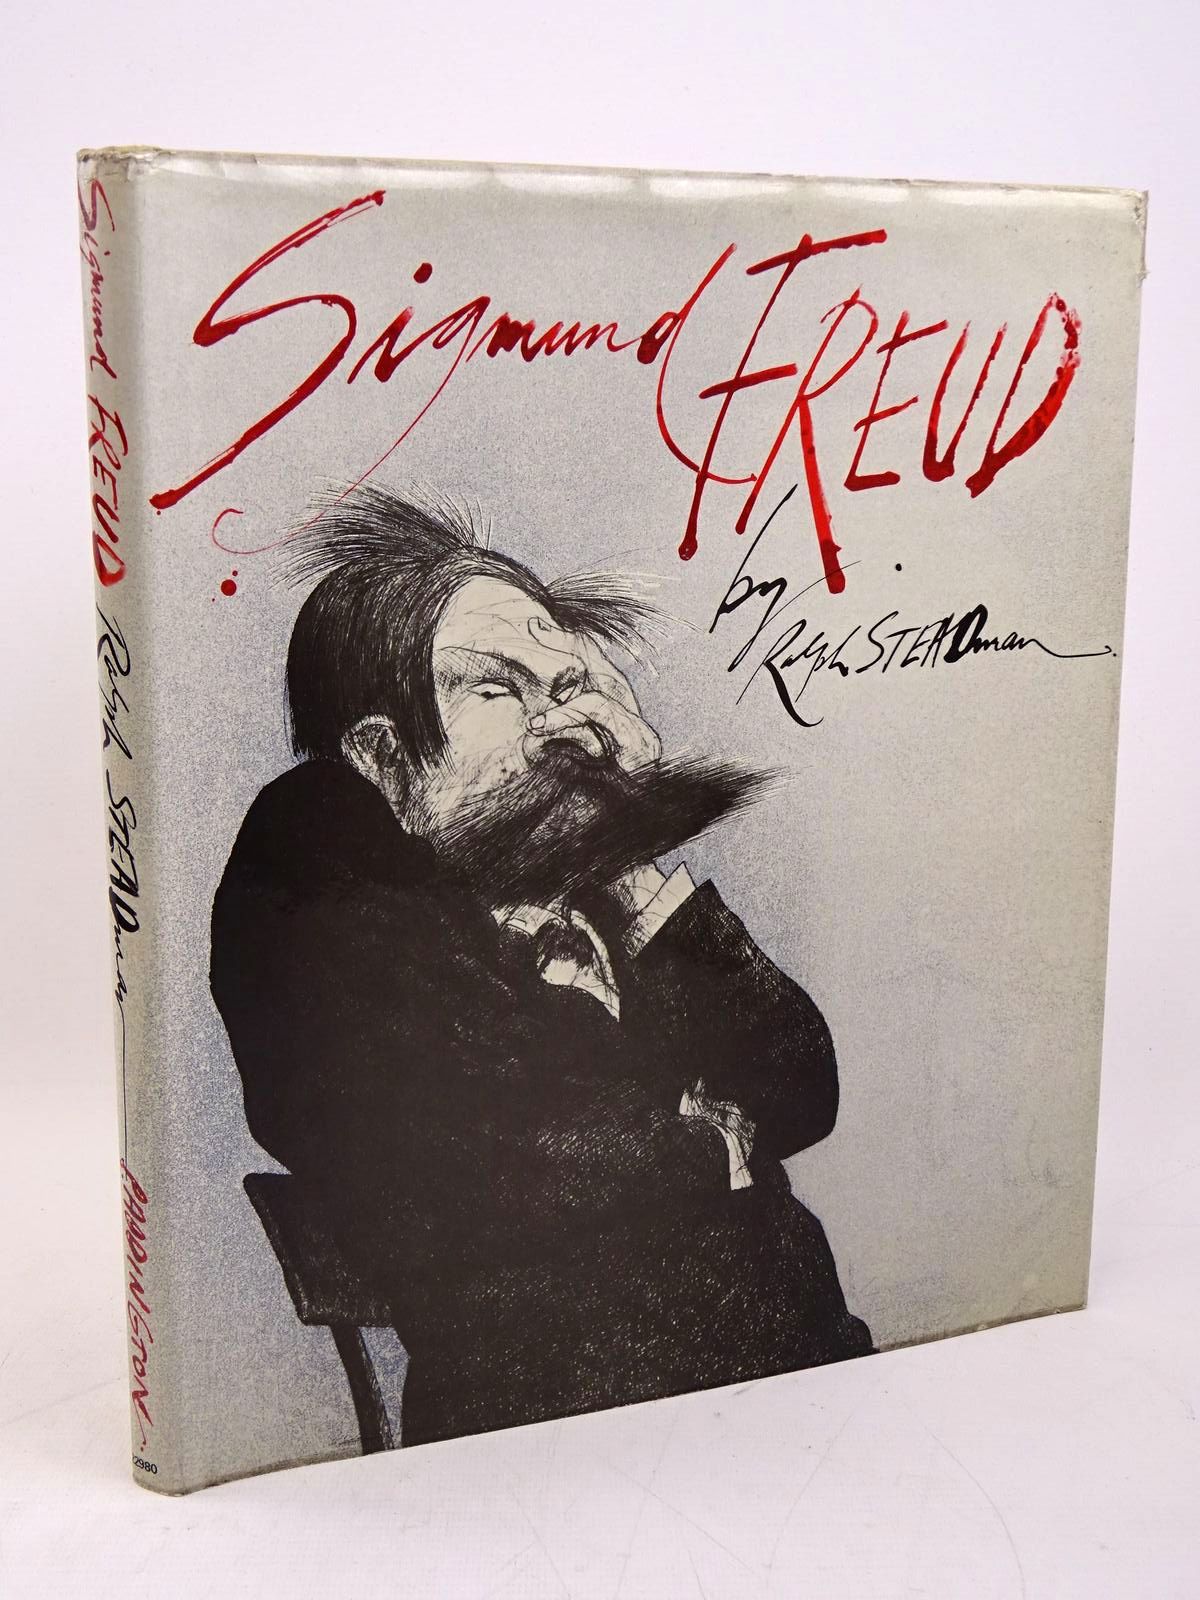 Photo of SIGMUND FREUD written by Steadman, Ralph illustrated by Steadman, Ralph published by Paddington Press (STOCK CODE: 1318017)  for sale by Stella & Rose's Books